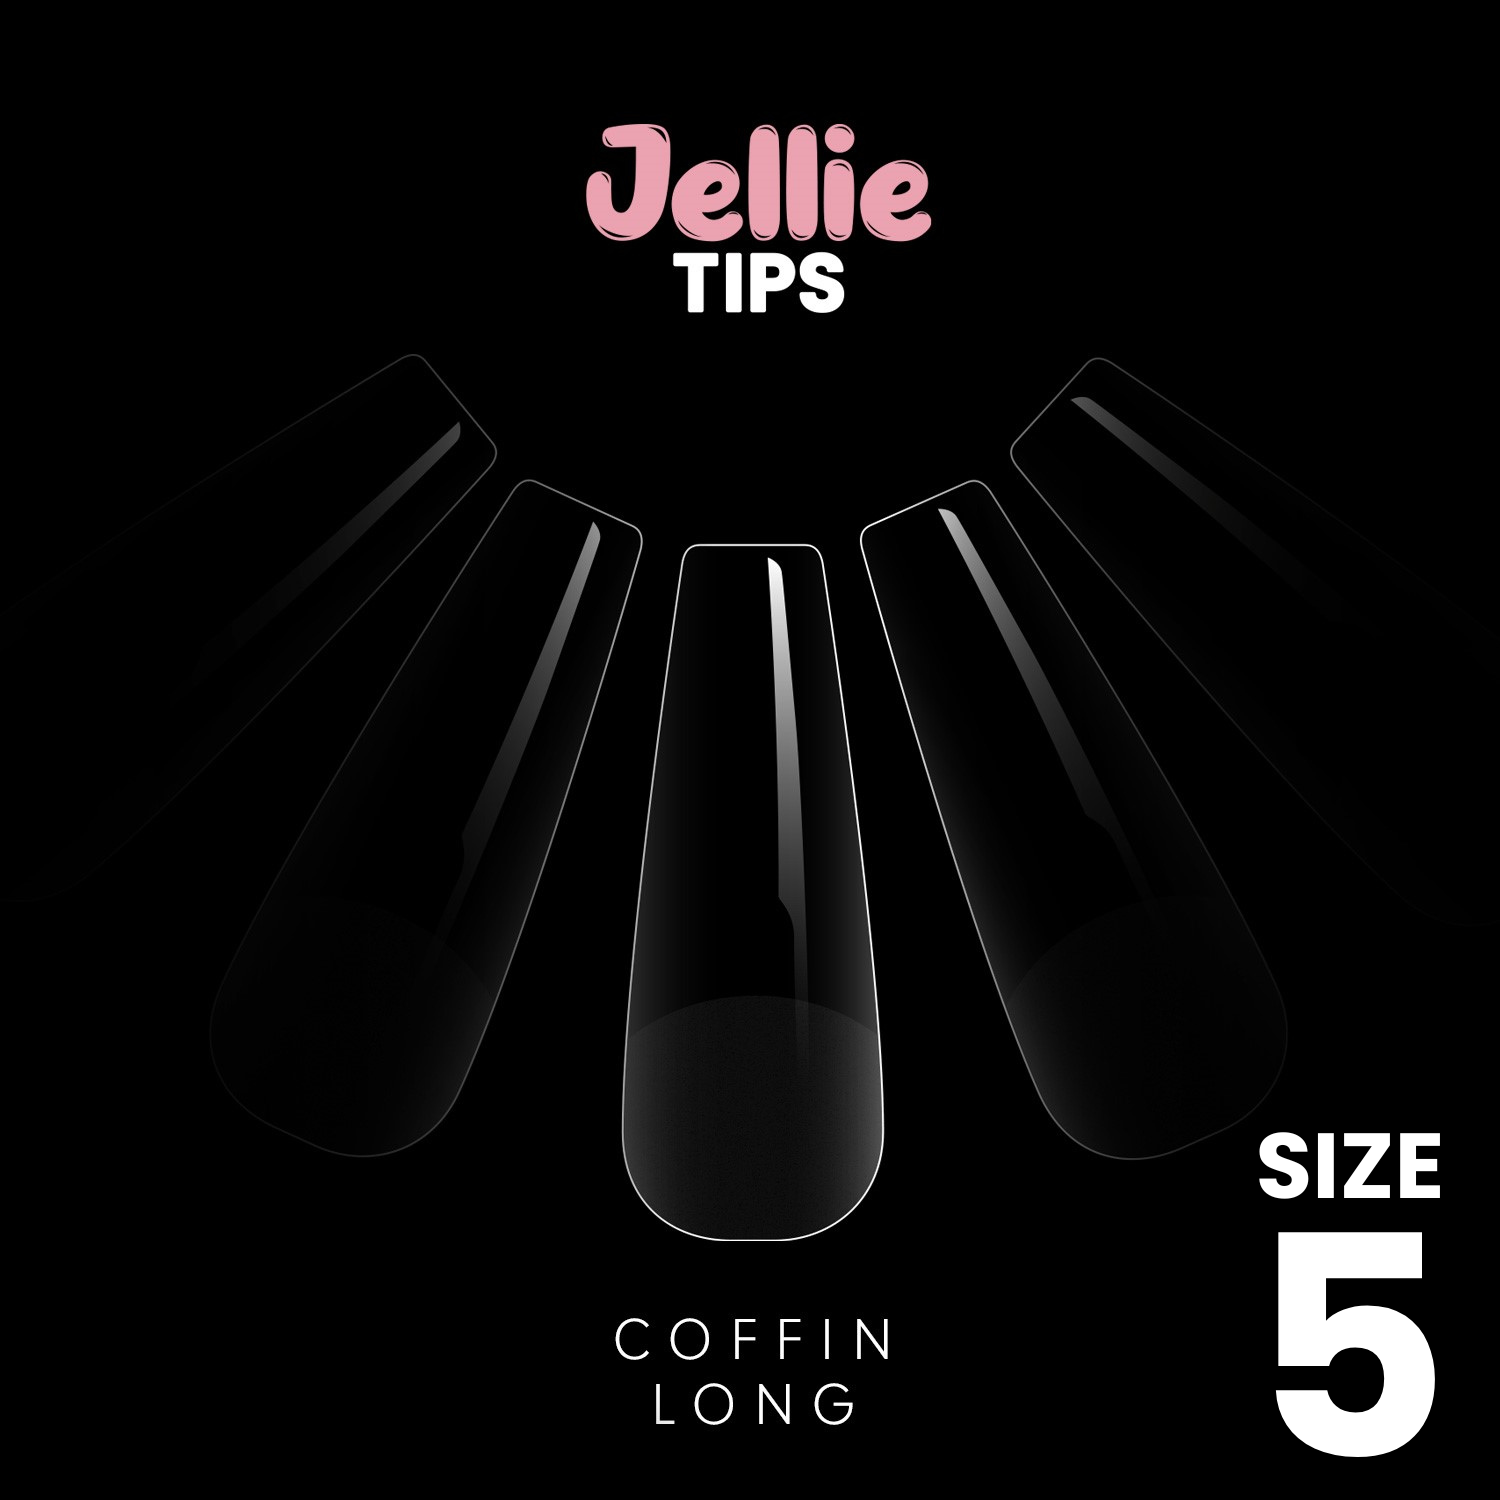 Halo Jellie Nail Tips Coffin Long, Sizes 5, 50 One Size